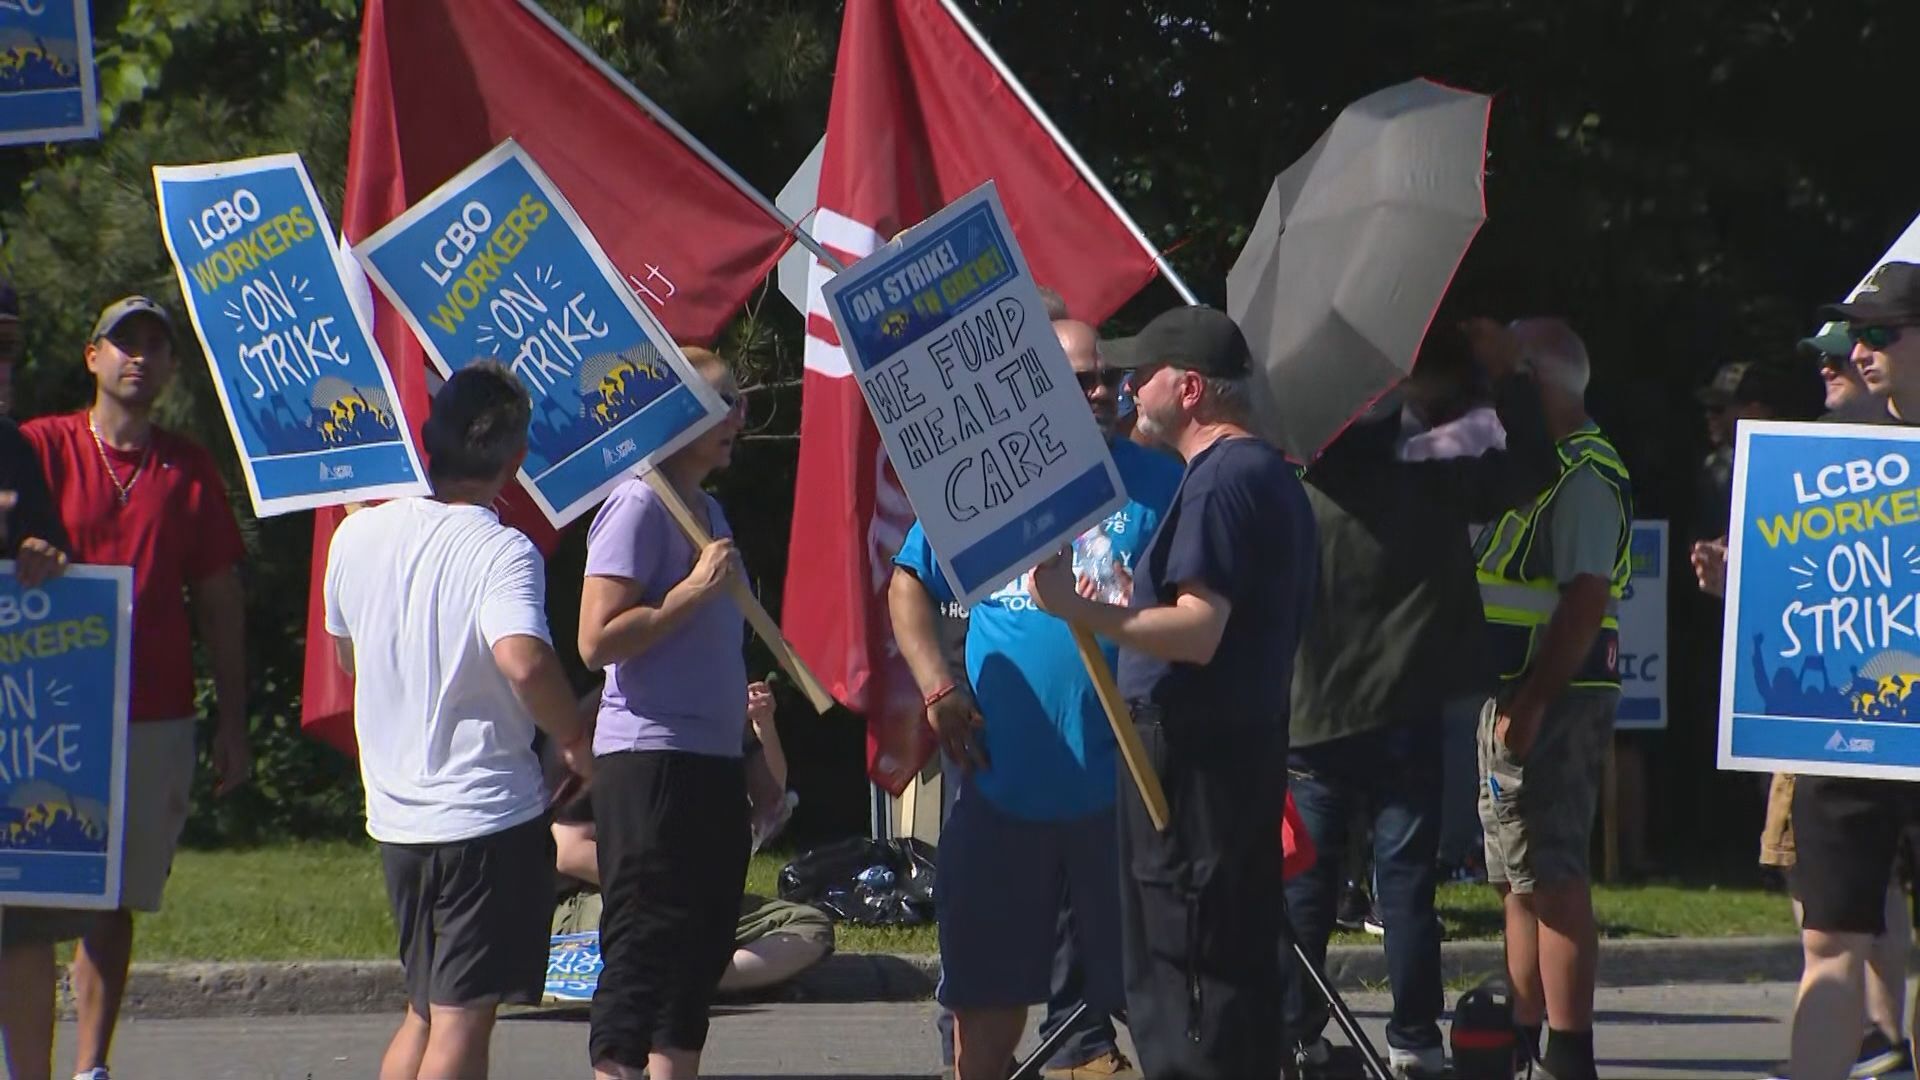 The strike is on! LCBO workers hit the picket lines